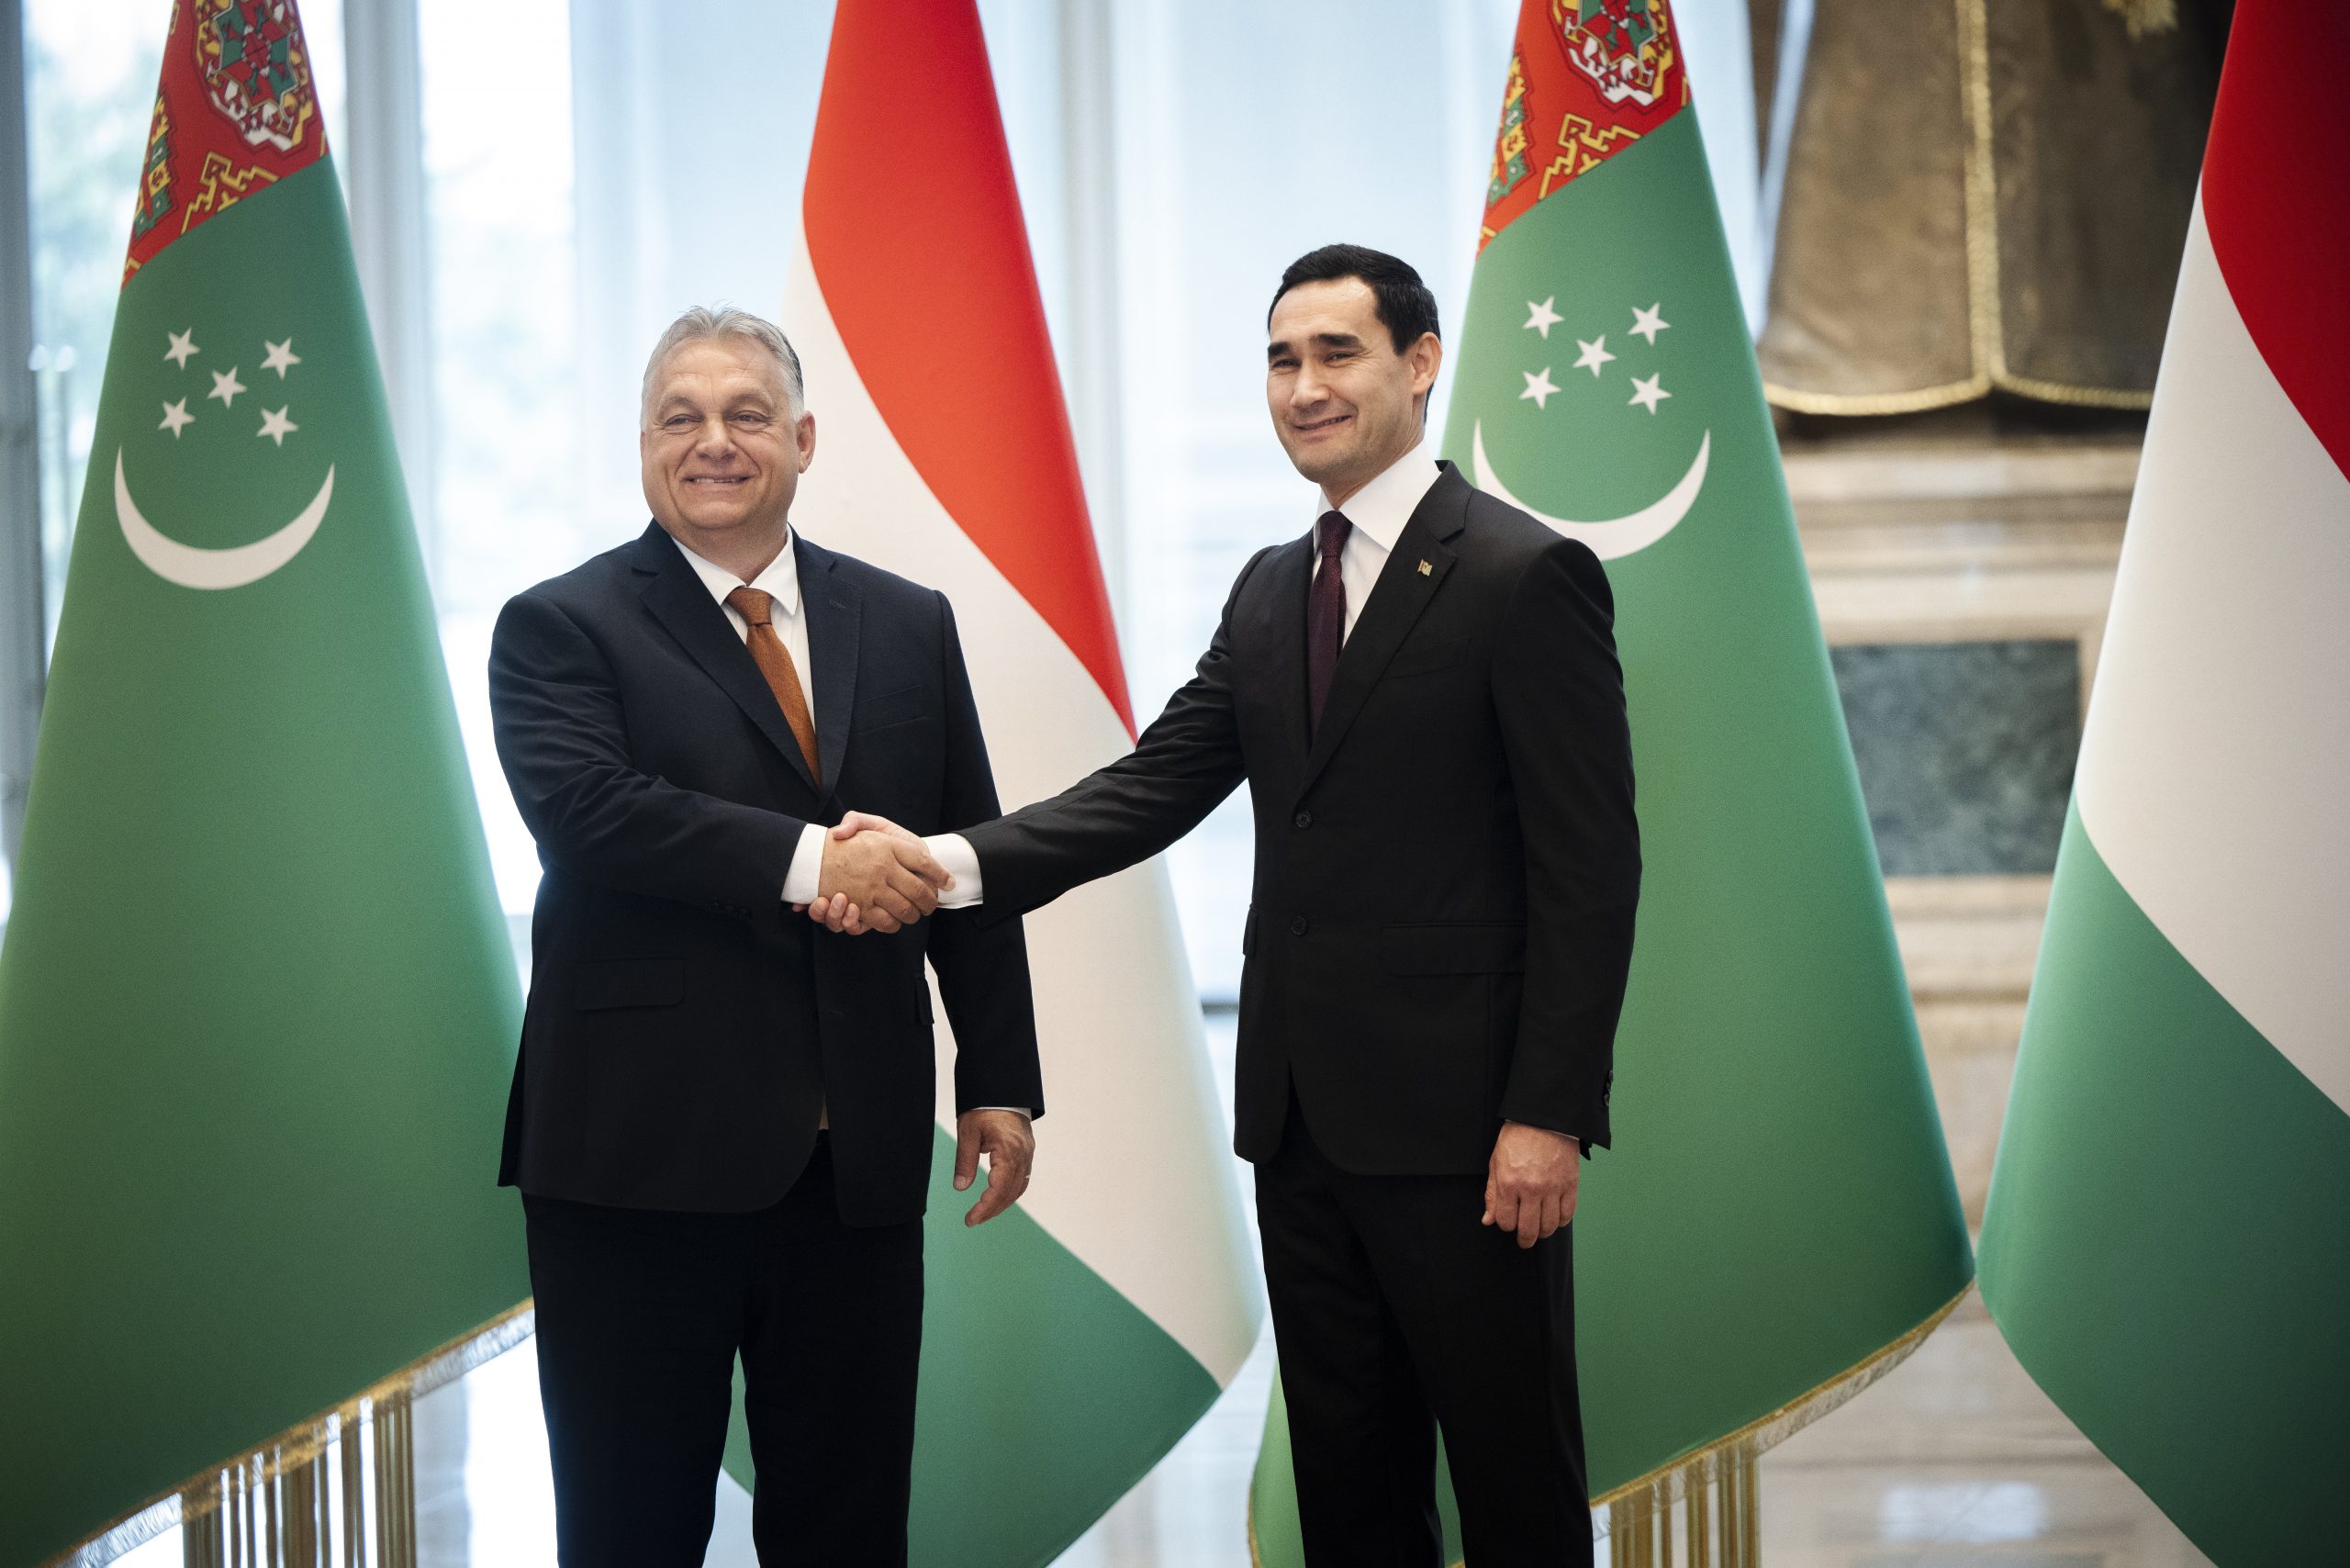 Viktor Orbán Stresses the Importance of Energy from Central Asia